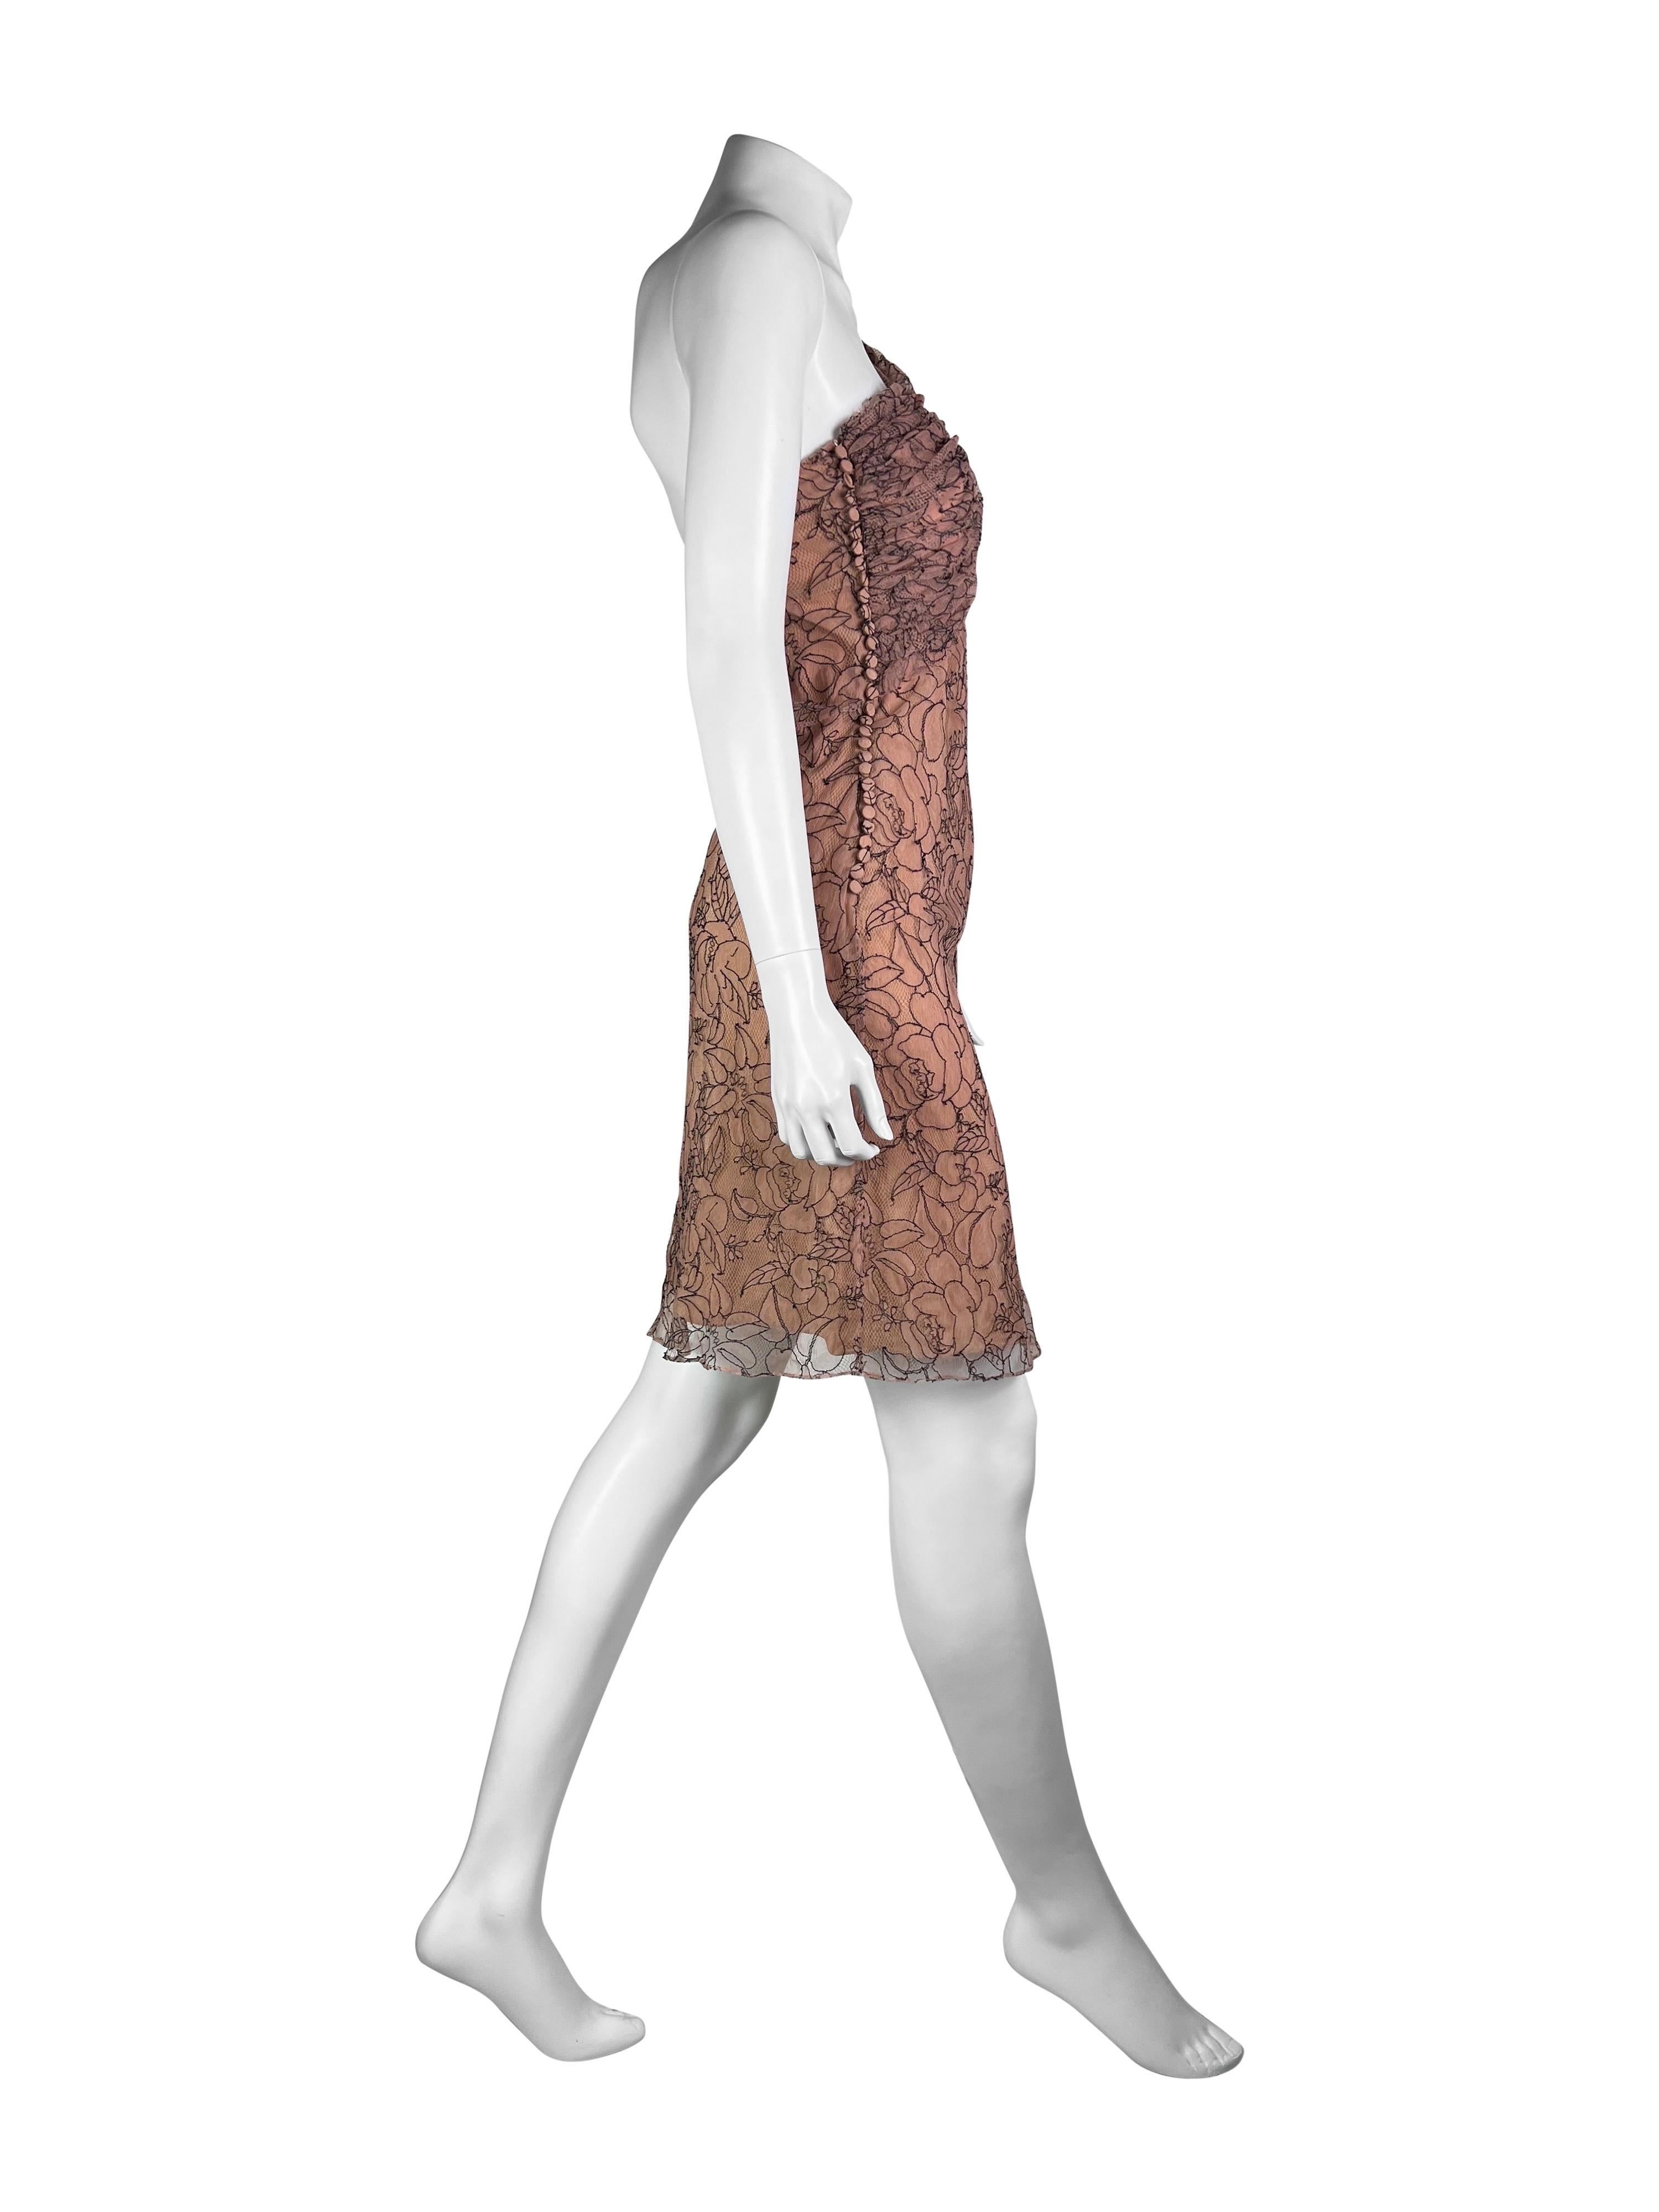 SS 2006 Dior by John Galliano Lace Mini Dress For Sale 1